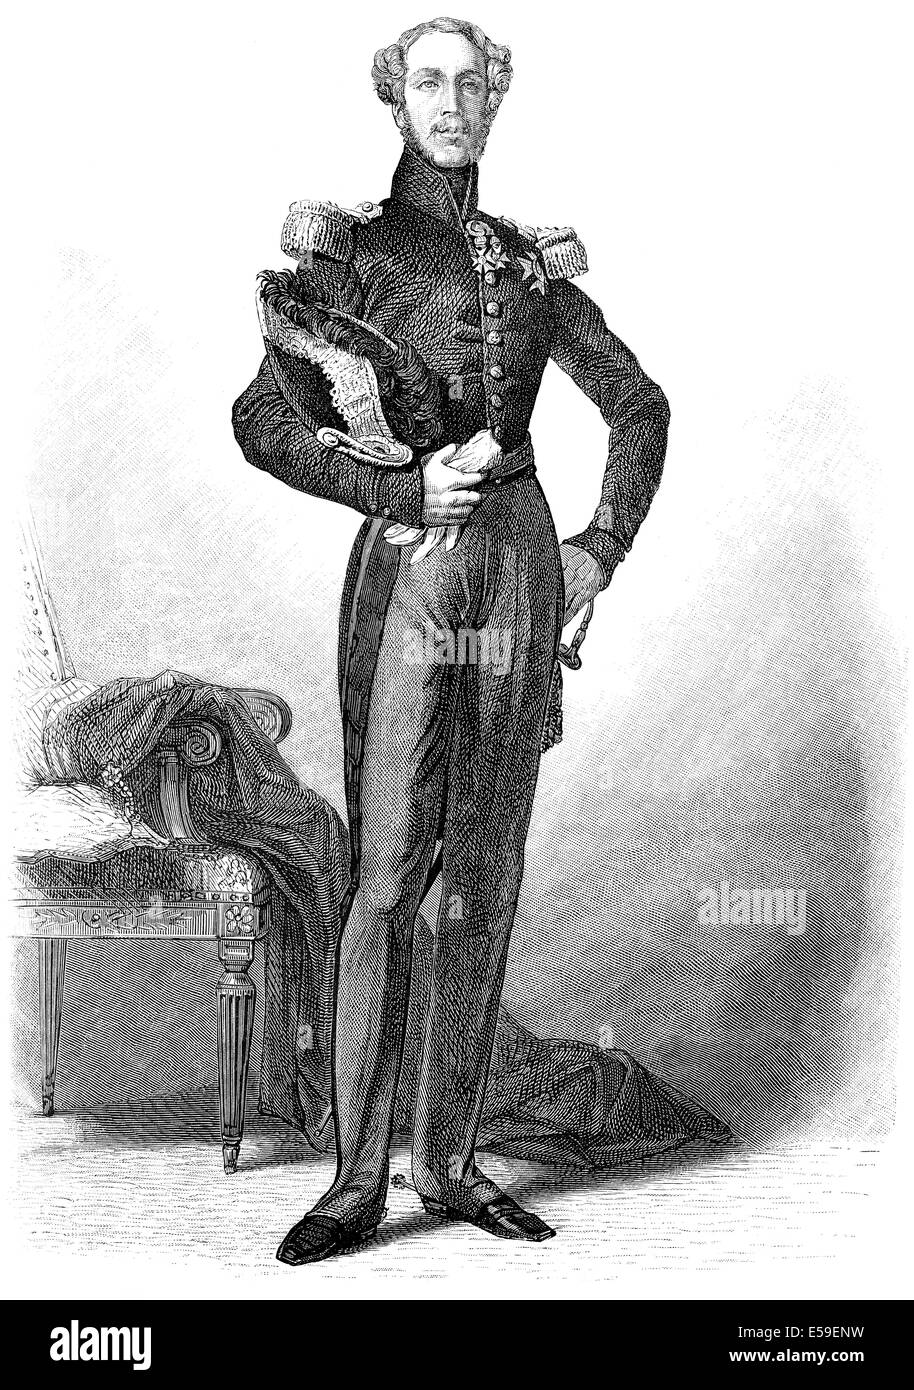 Prince Ferdinand Philippe of Orléans, 1810-1842, the eldest son of Louis Philippe d'Orléans, Duke of Orléans and future King Lou Stock Photo